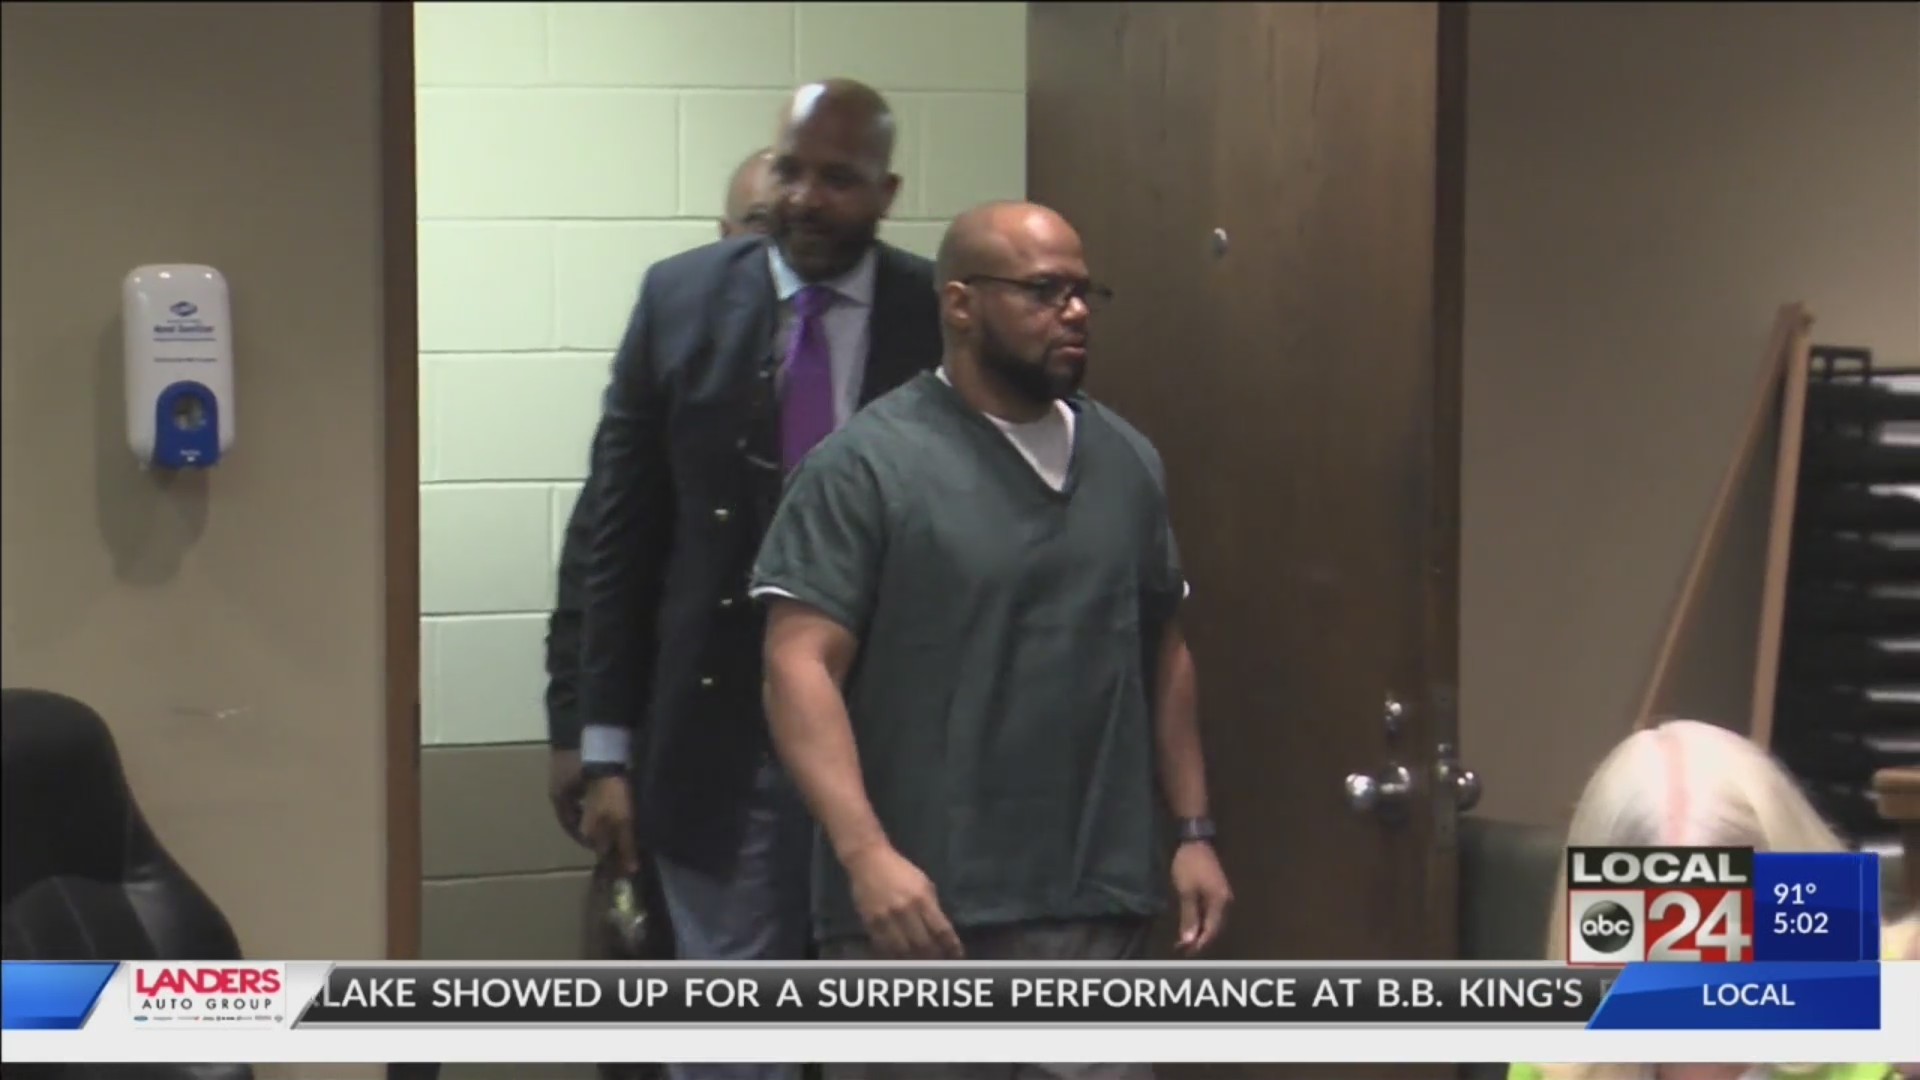 Defense blames new evidence from discovery for delay in trial for Billy Turner, charged with Lorenzen Wright's murder